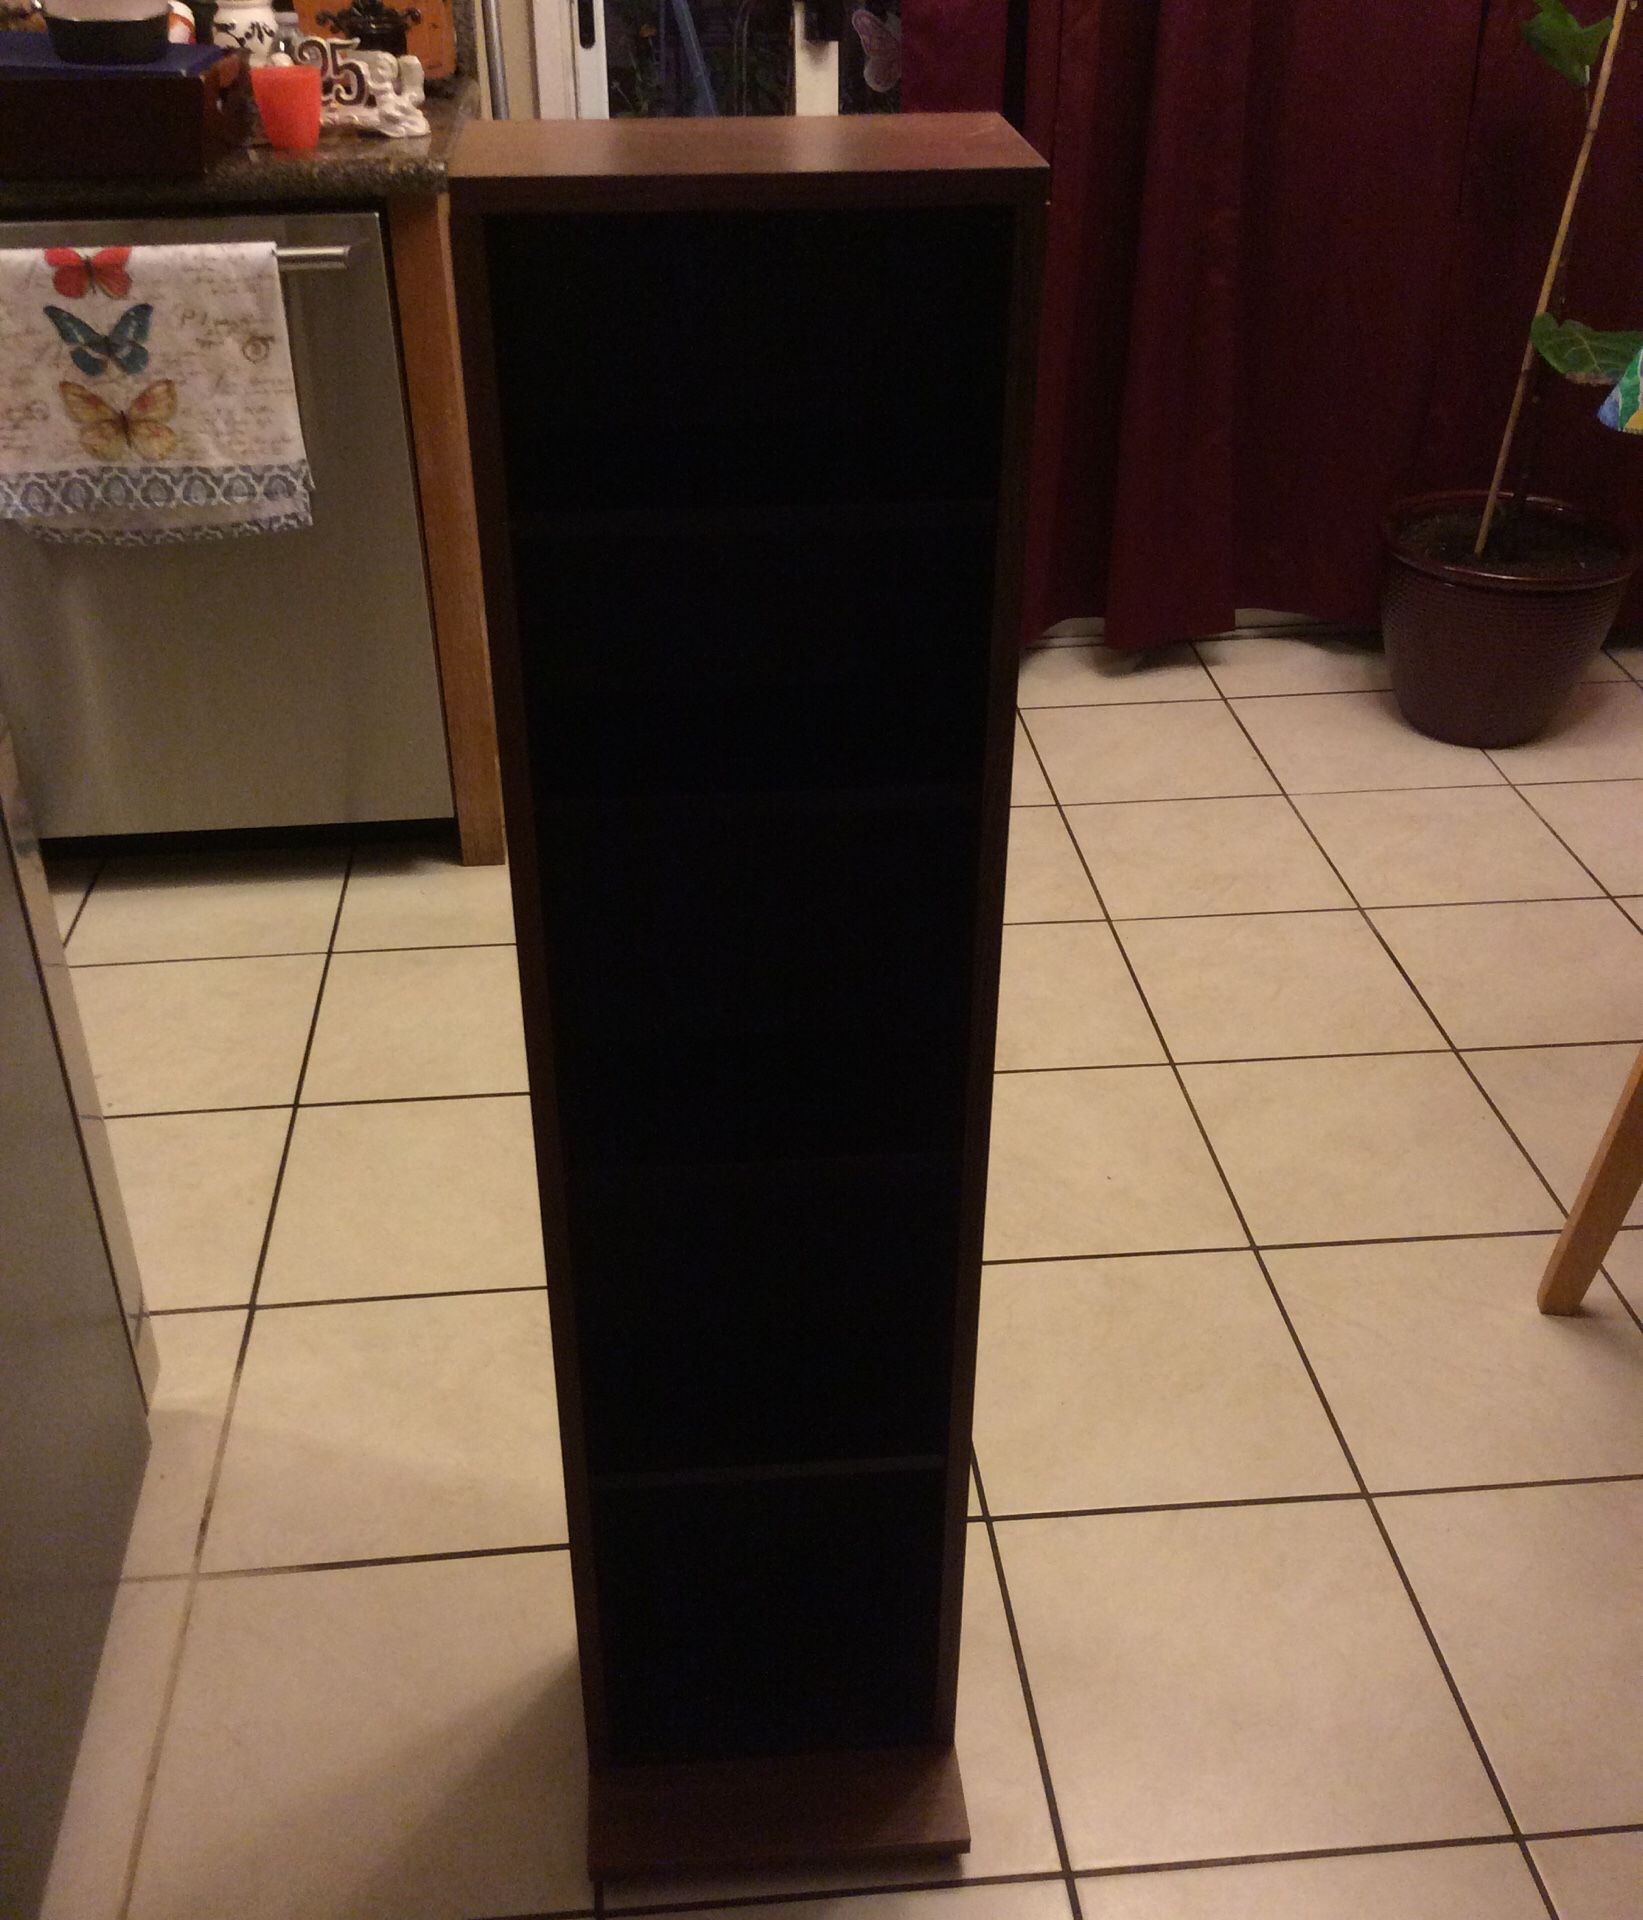 VHS/CD tower